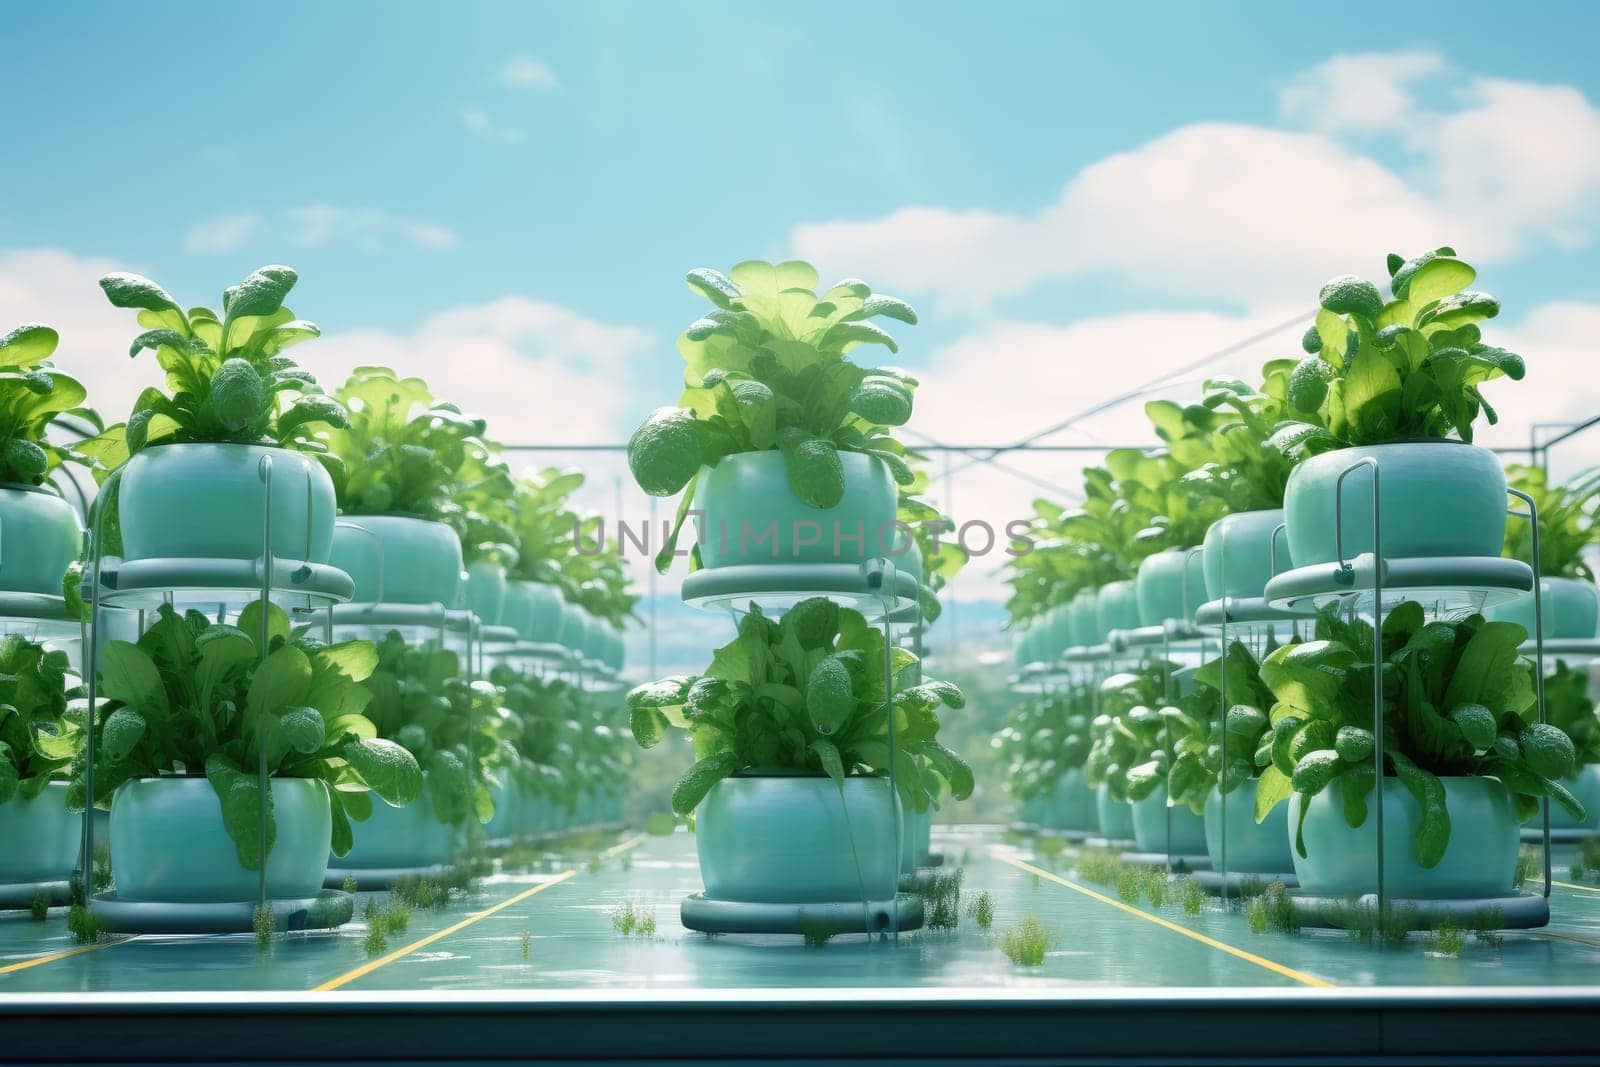 Hydroponics: Innovative Soilless Plant Growth Technique Using Nutrient Solutions by Yurich32